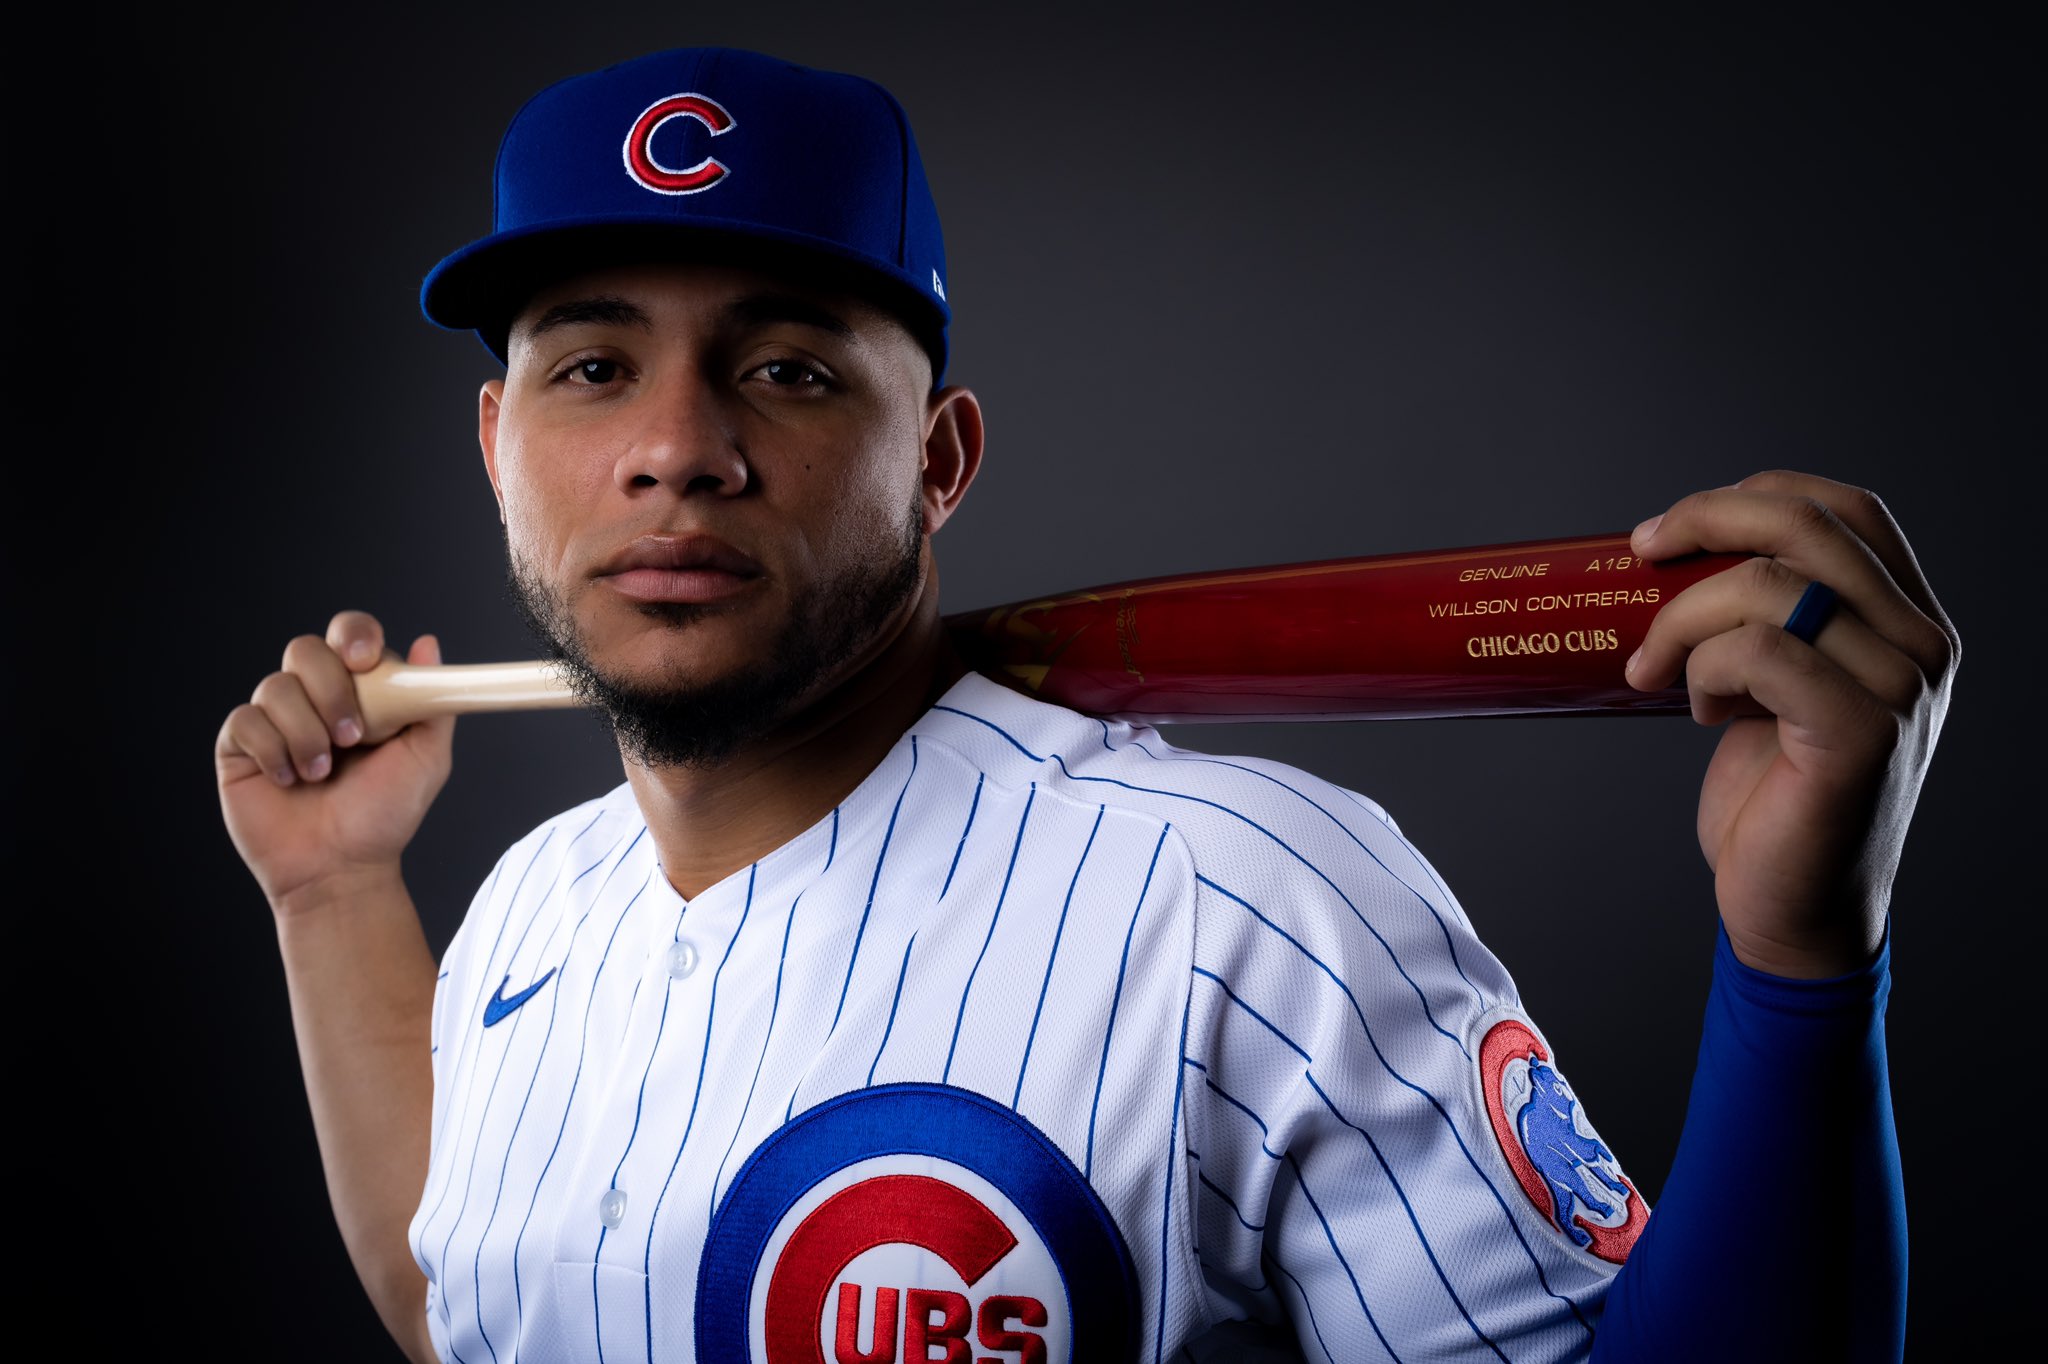 Willson Contreras poses holding a bat behind his shoulders.